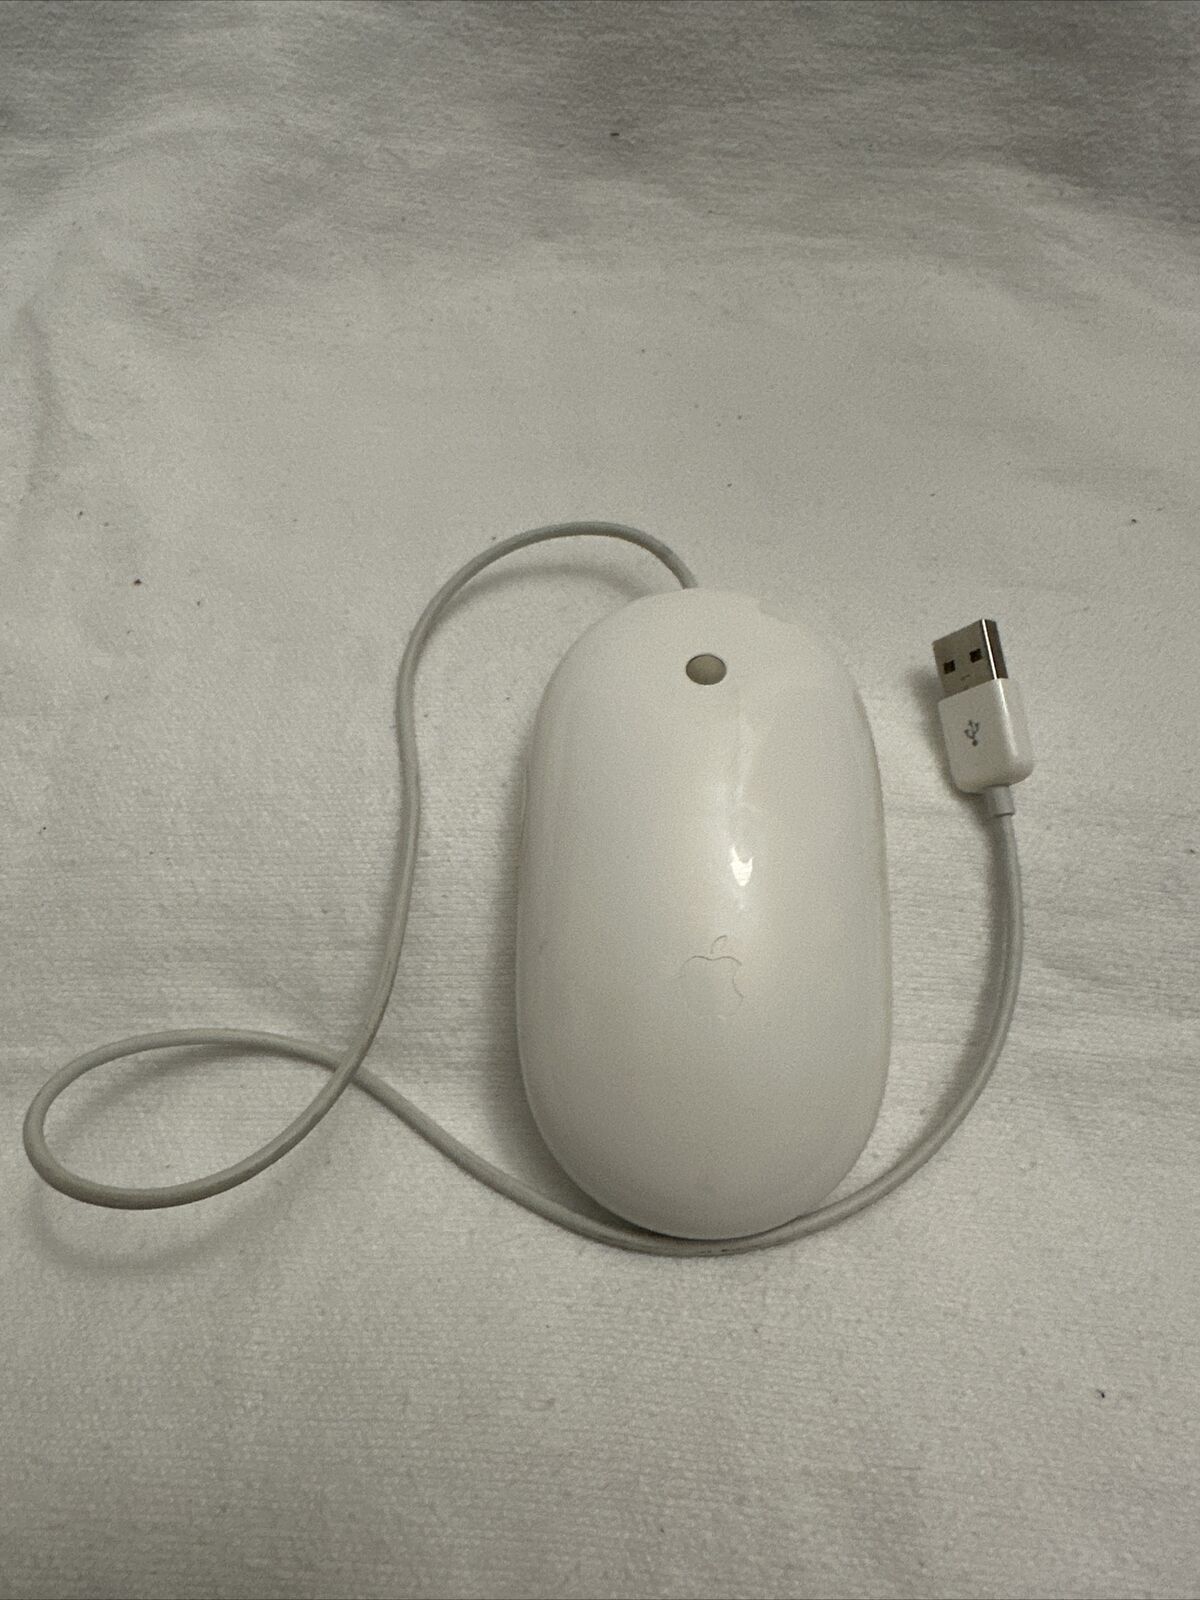 Vintage Apple Mouse Working Condition